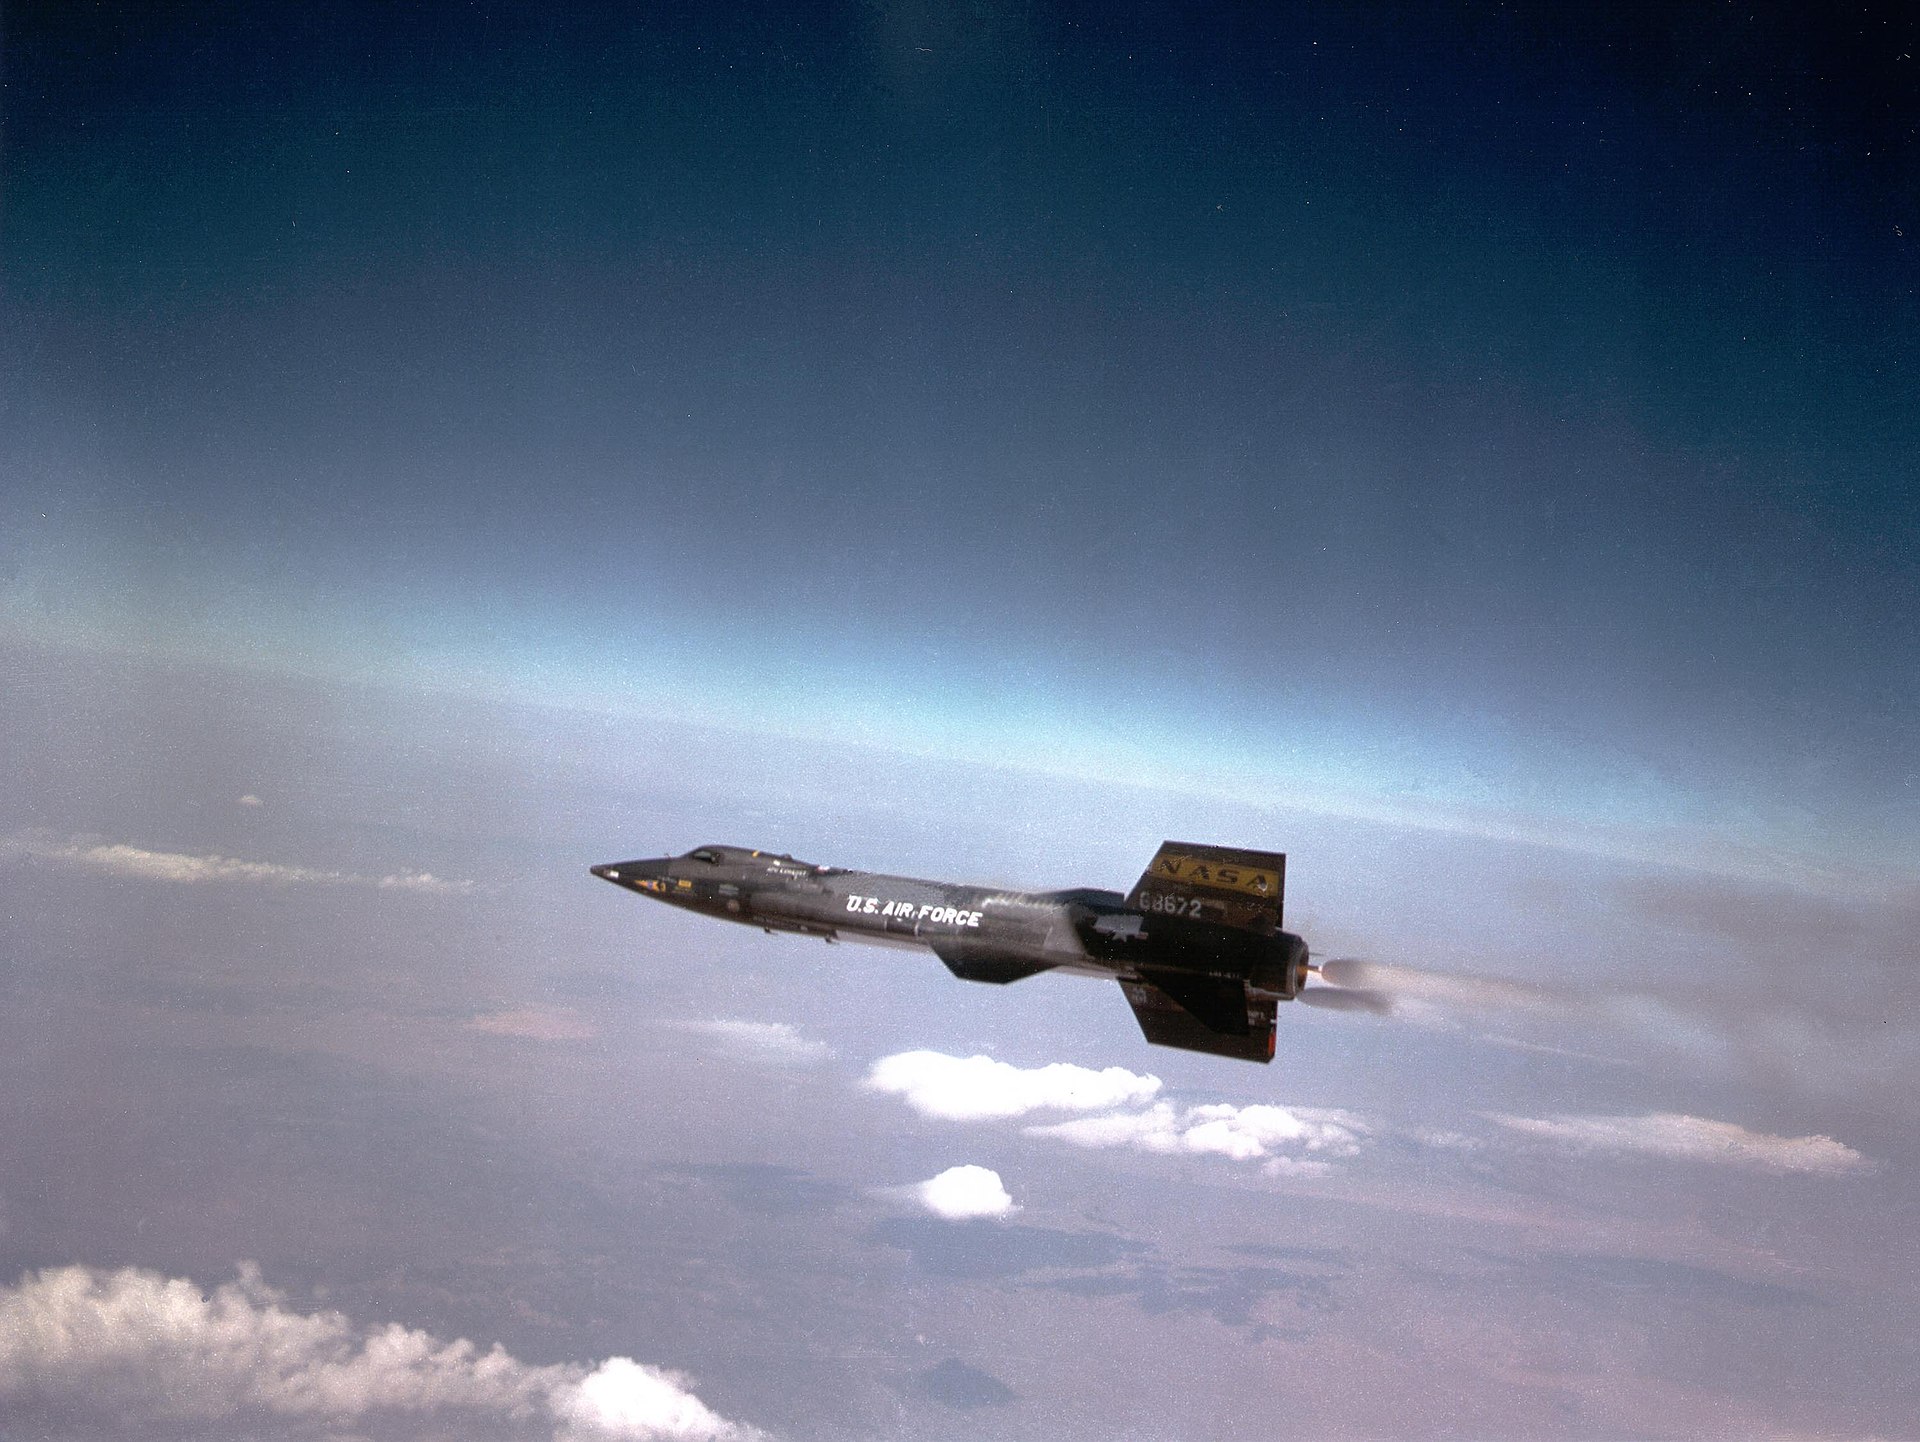 North American X-15 rocket plane in flight, showcasing its sleek design and rocket propulsion at high altitude, embodying the pinnacle of hypersonic research.